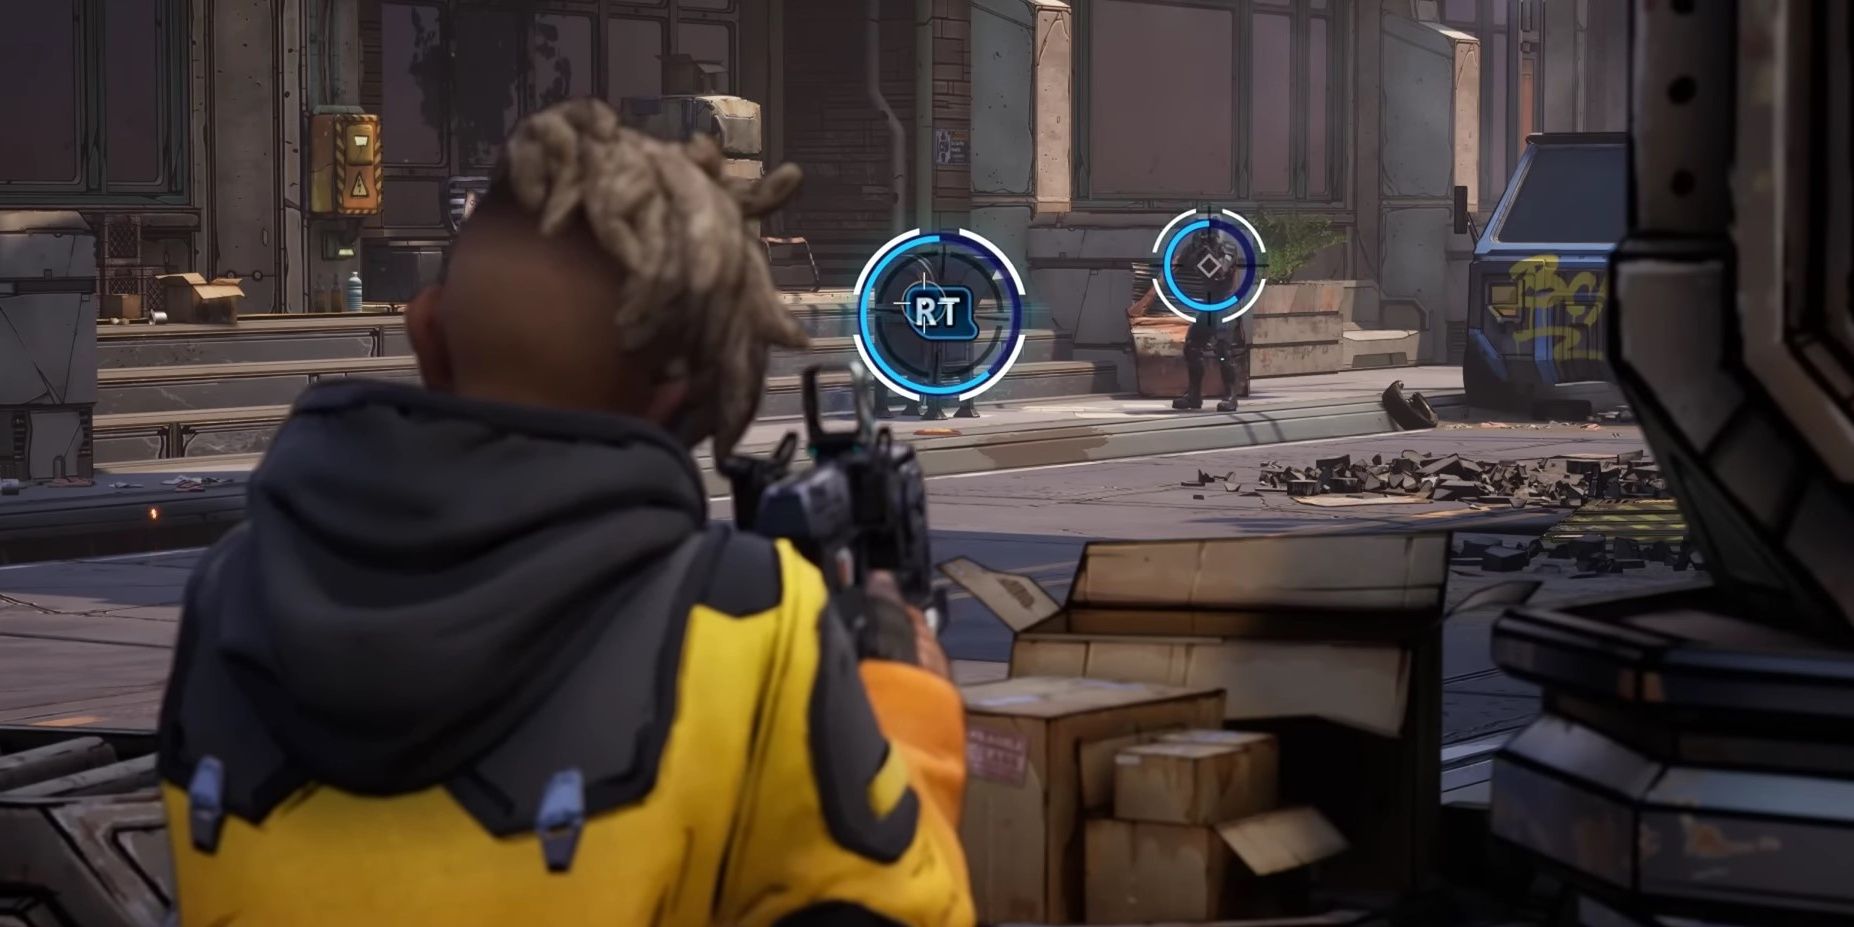 Screenshot of Octavio being prompted to shoot a soldier or object using Brock in New Tales from the Borderlands.